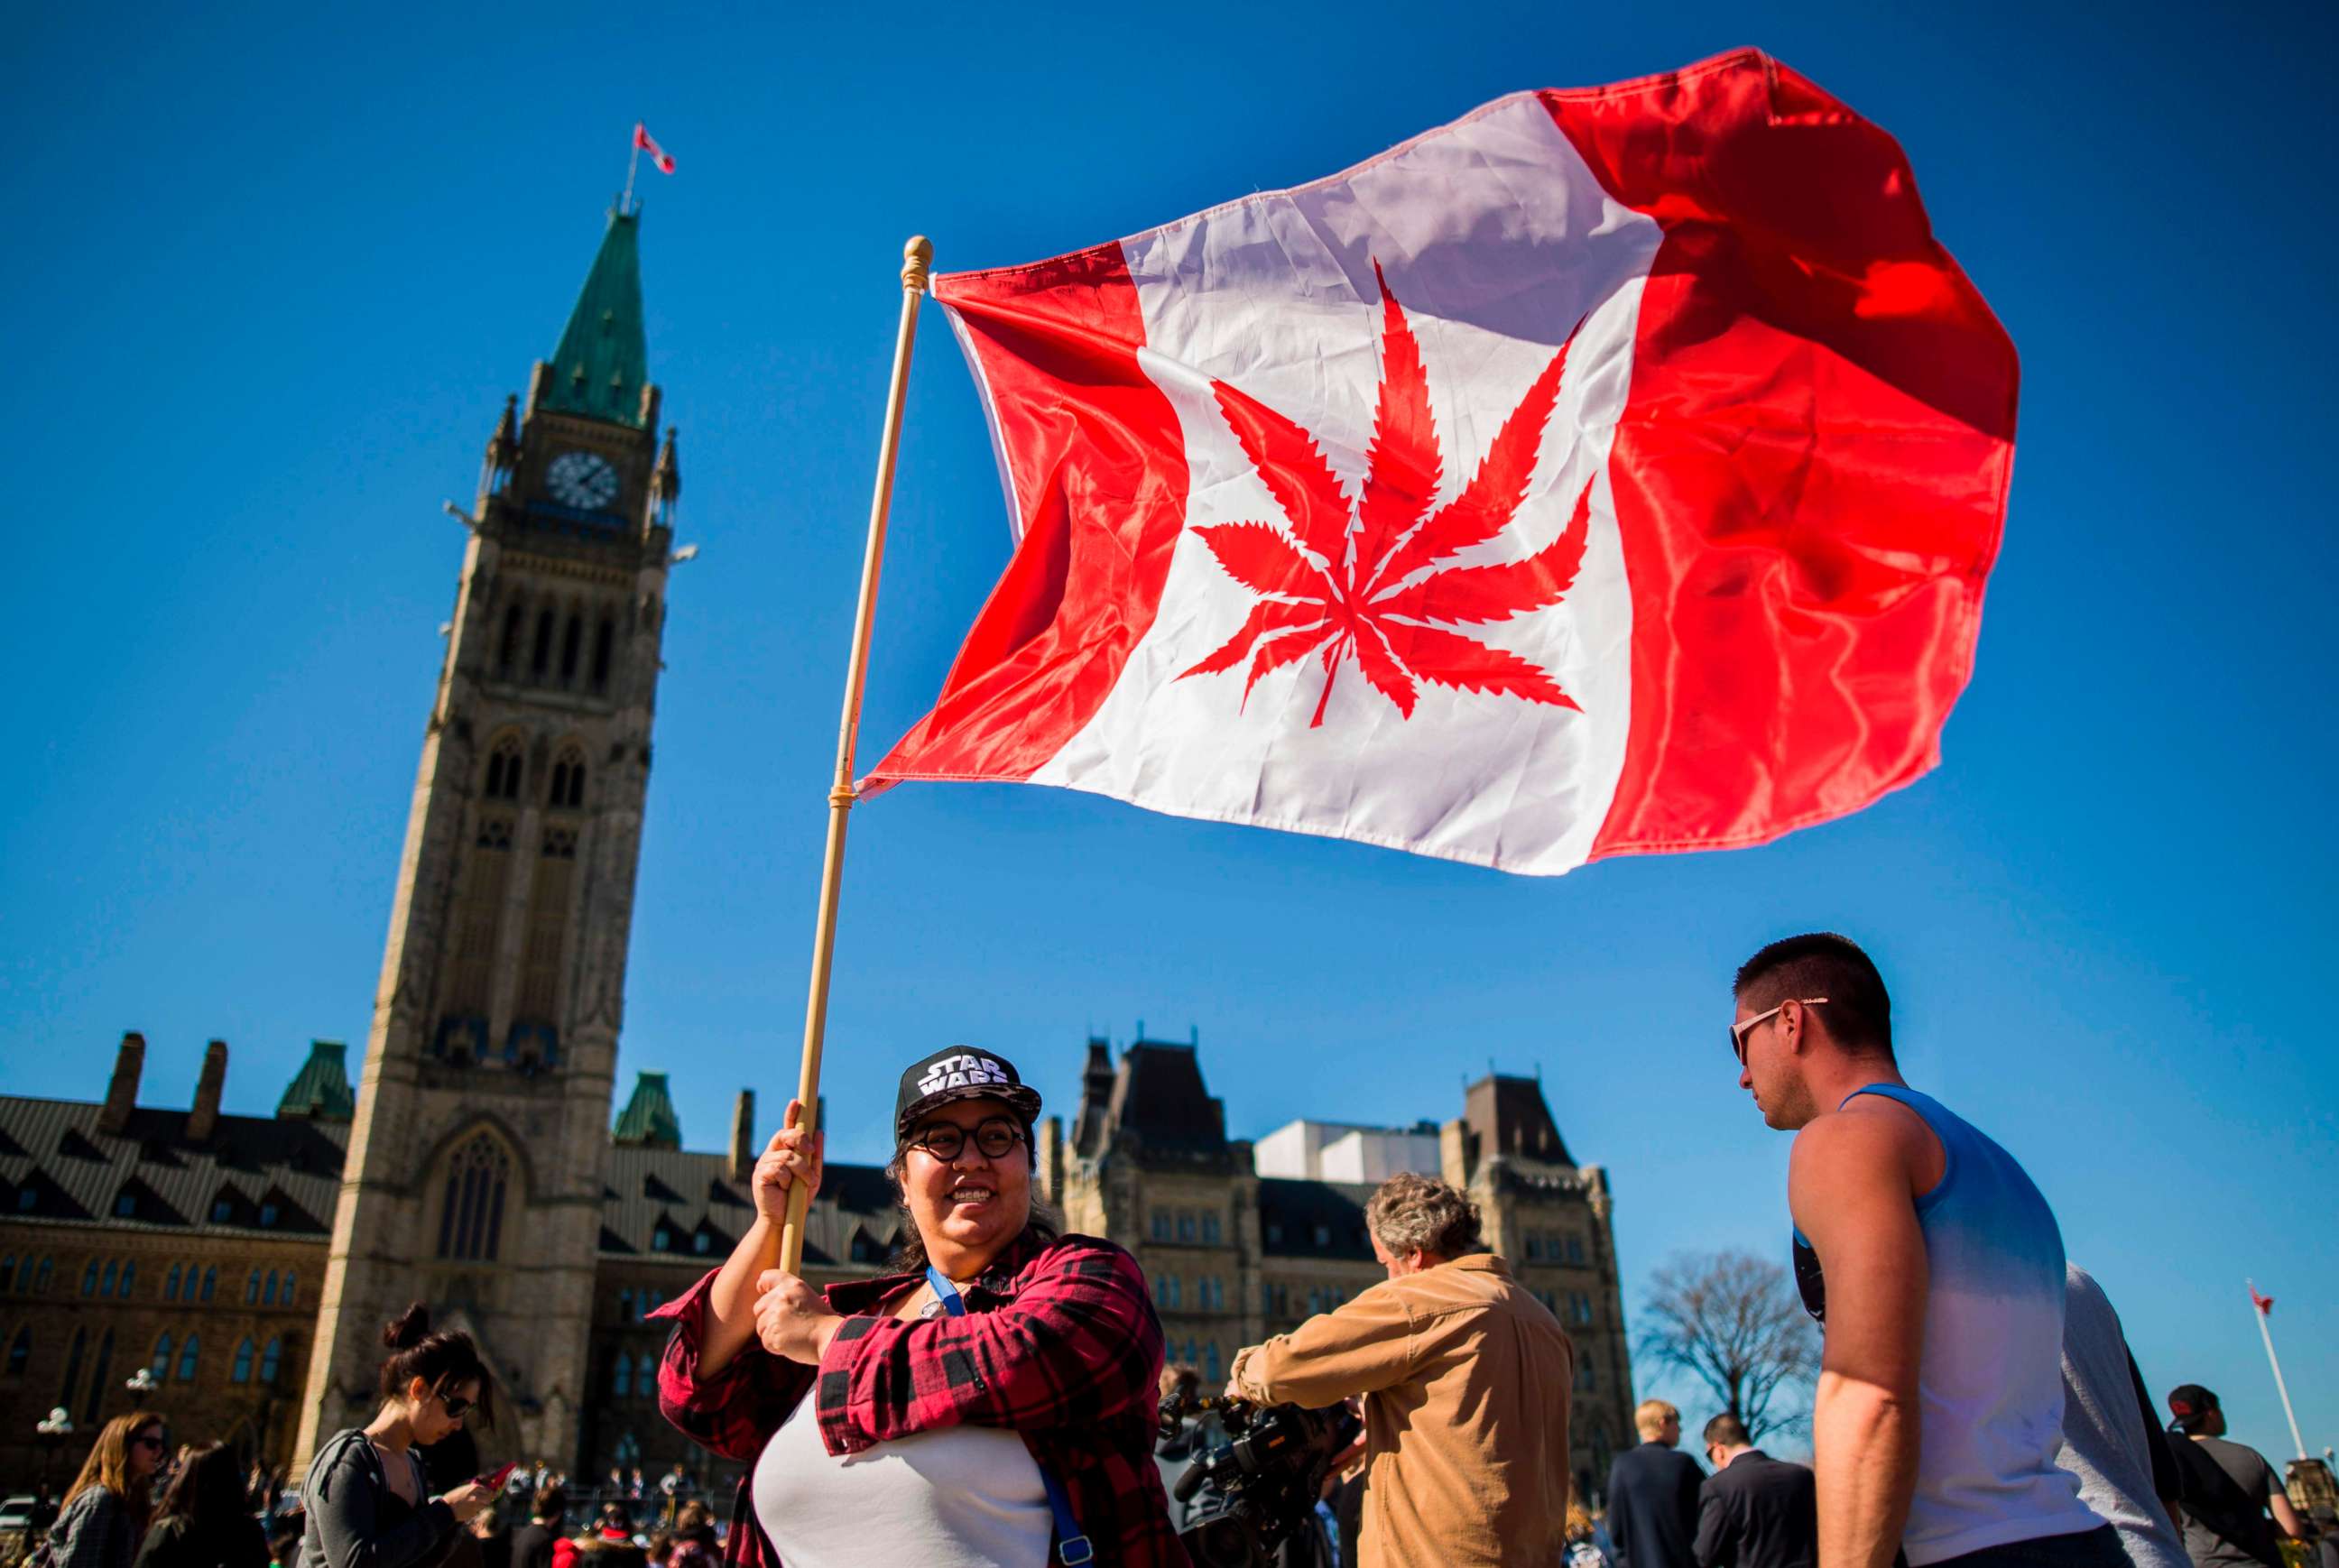 PHOTO: A woman waves a flag with a marijuana leaf on it next to a group gathered to celebrate National Marijuana Day on Parliament Hill in Ottawa, Canada, April 20, 2016. 